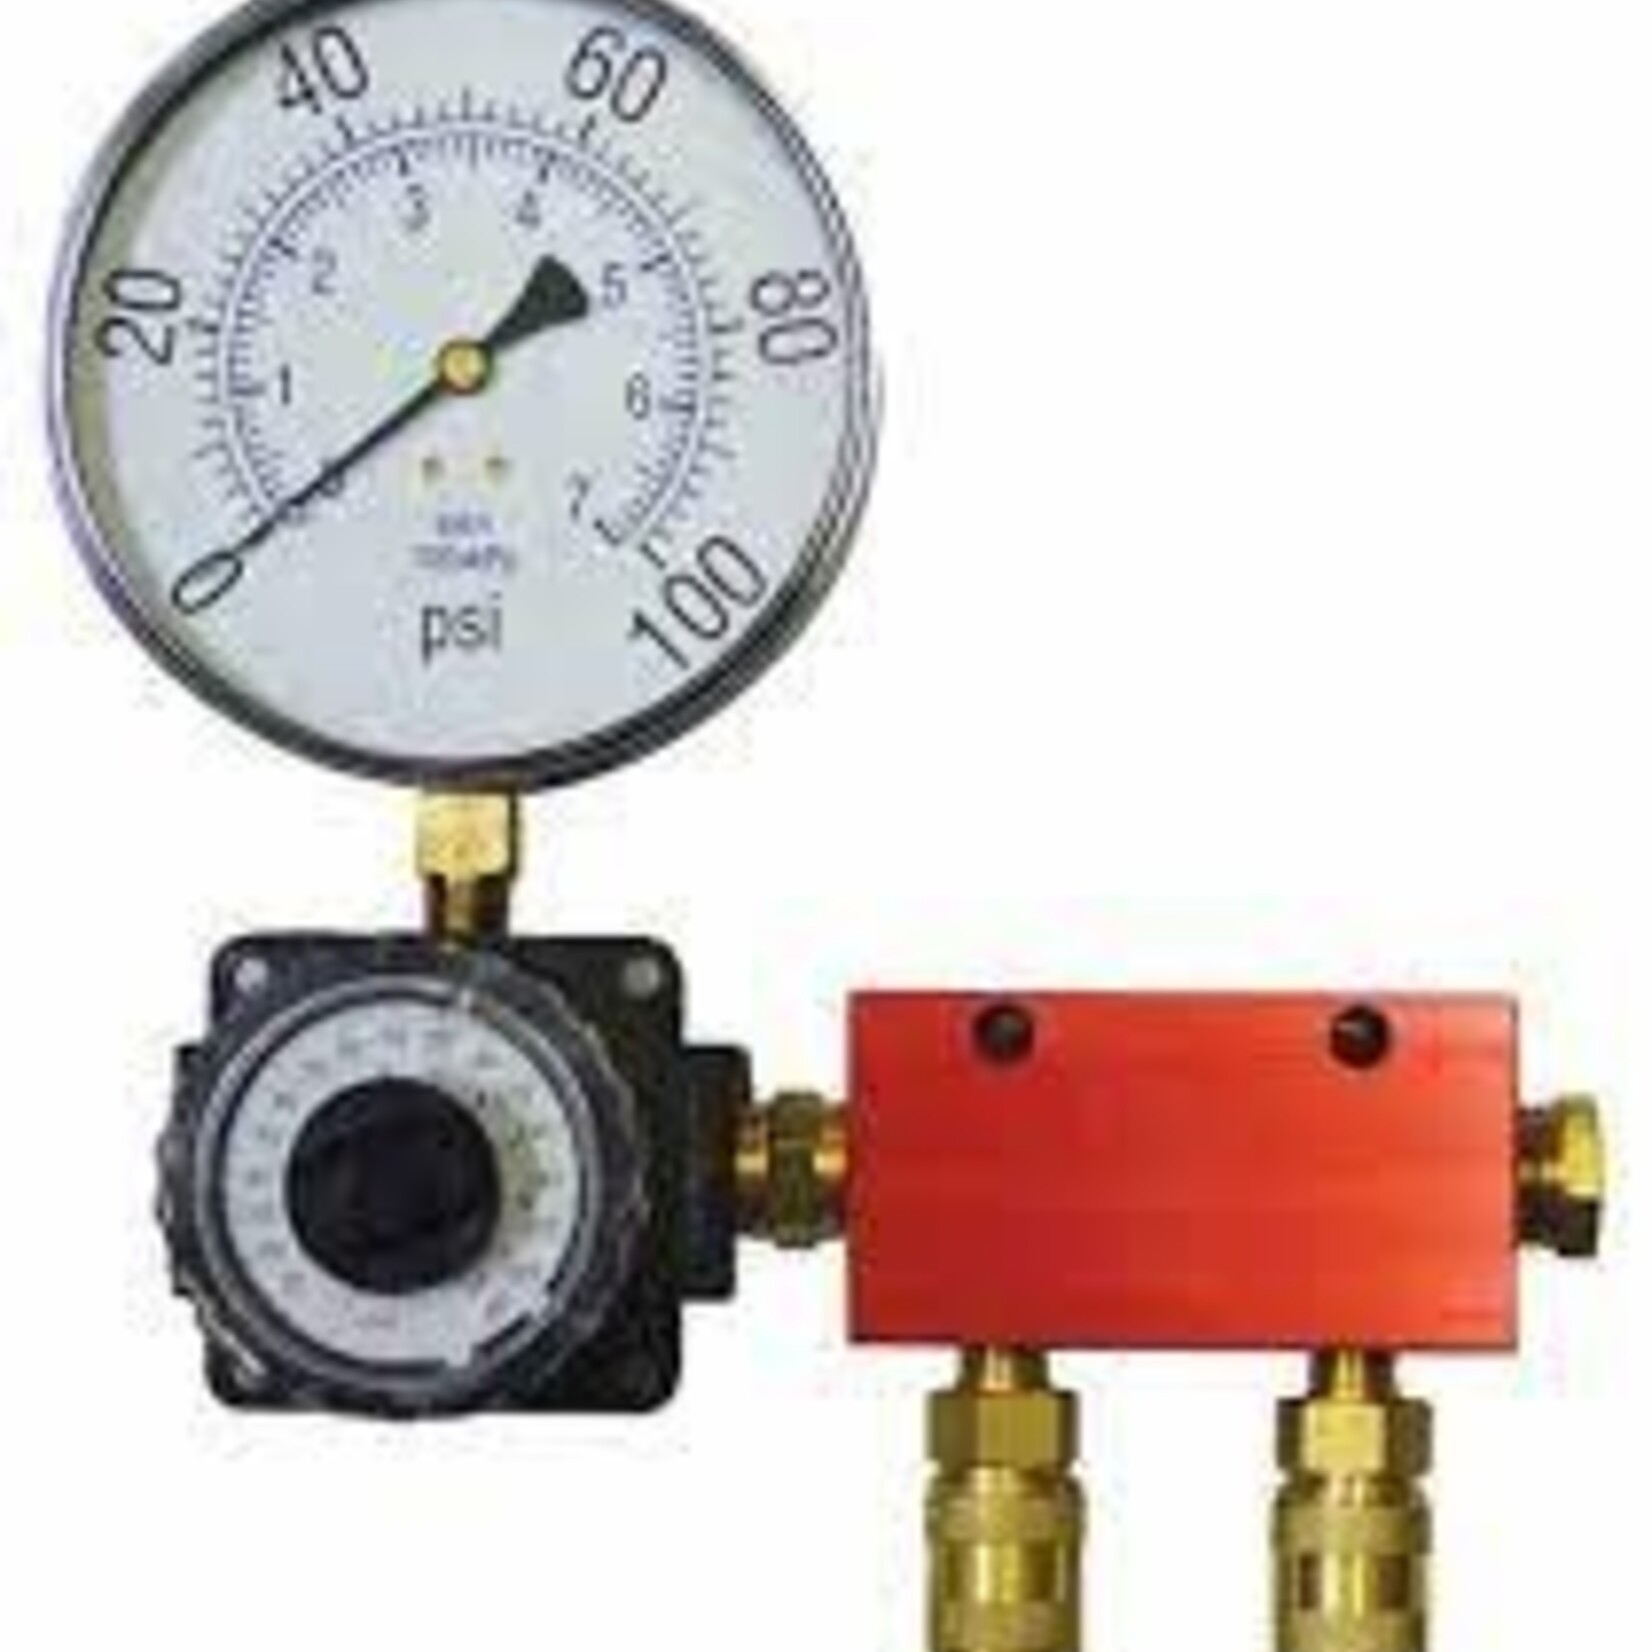 RTI RTI Precision regulator with large gauge and multiport mainfold